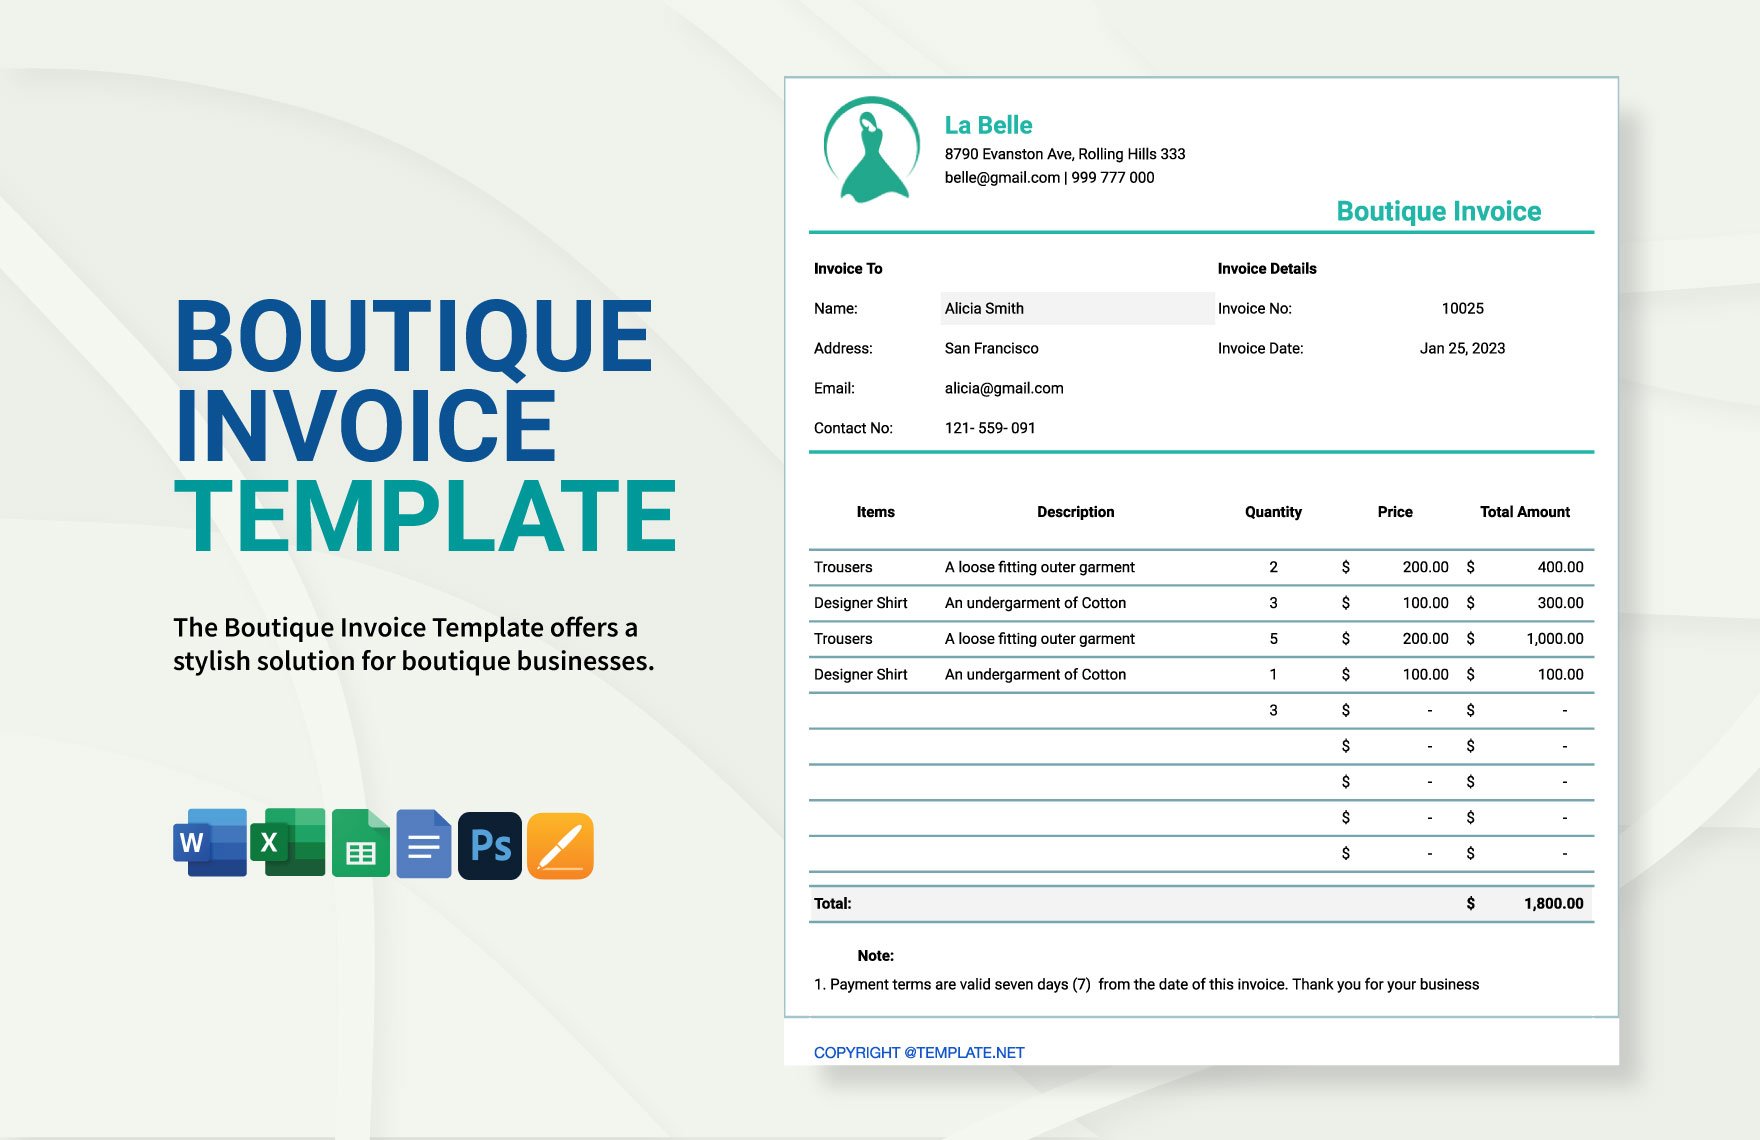 Boutique Invoice Template in Word, Google Docs, Excel, Google Sheets, PSD, Apple Pages